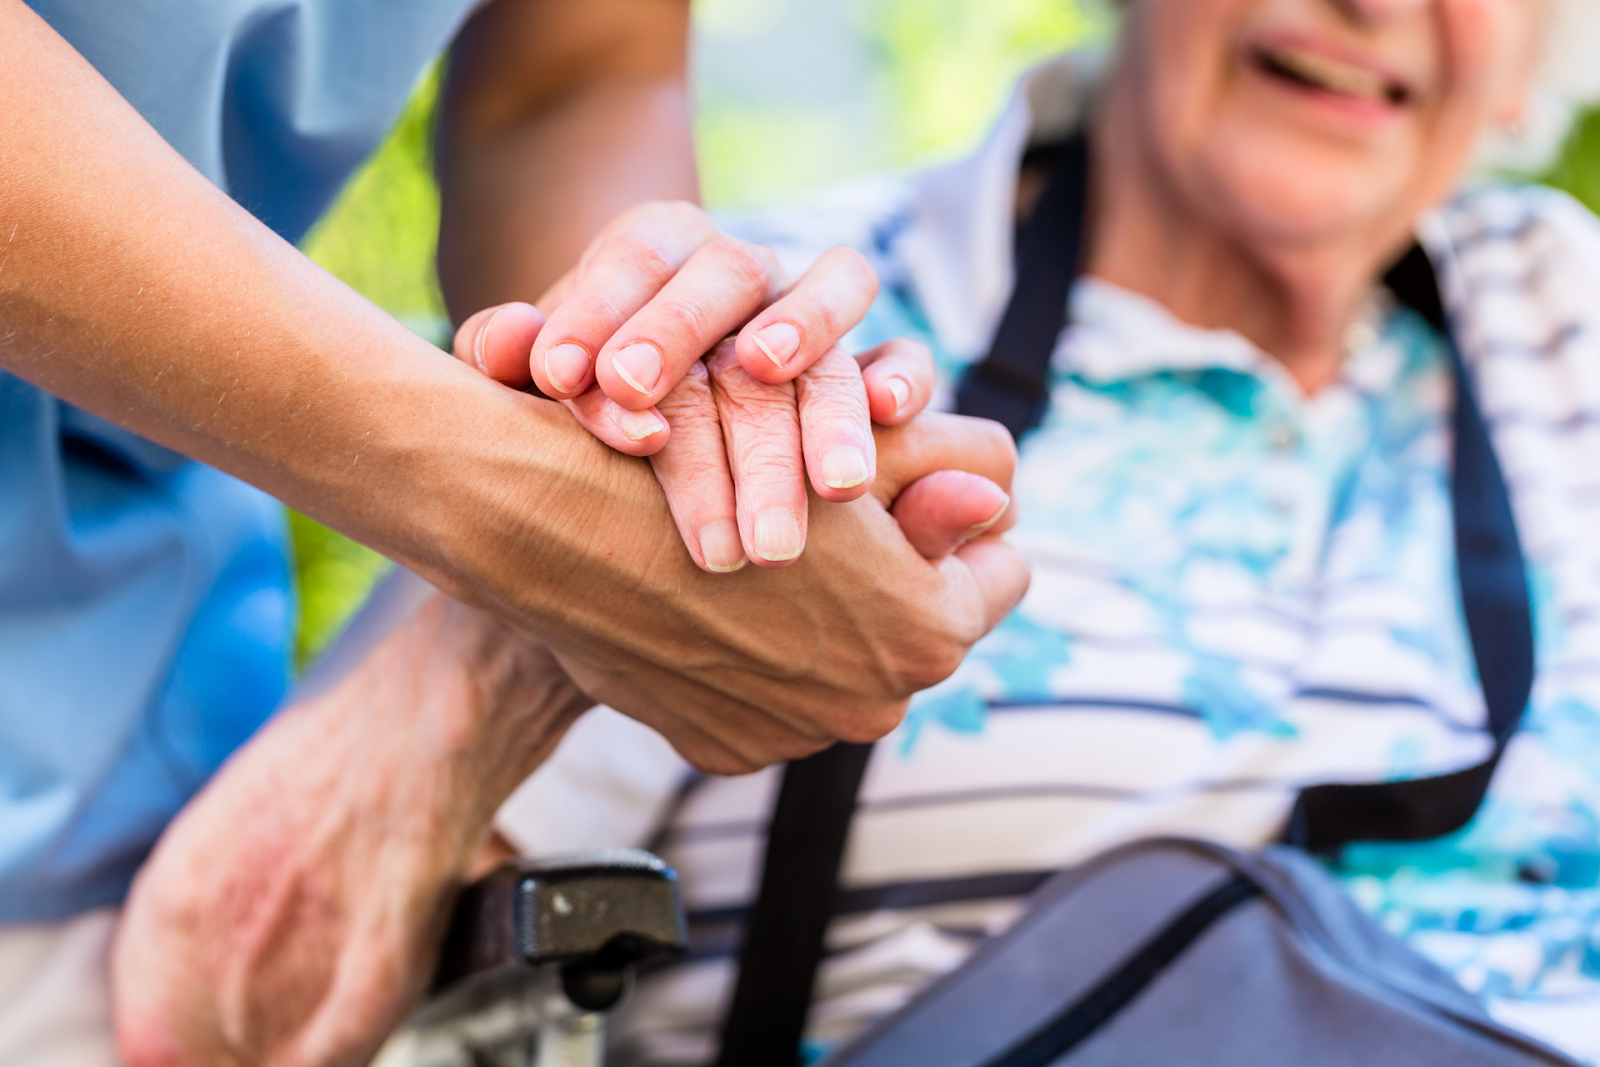 Caring For The Caregivers - The Importance Of Support For Those Providing Care